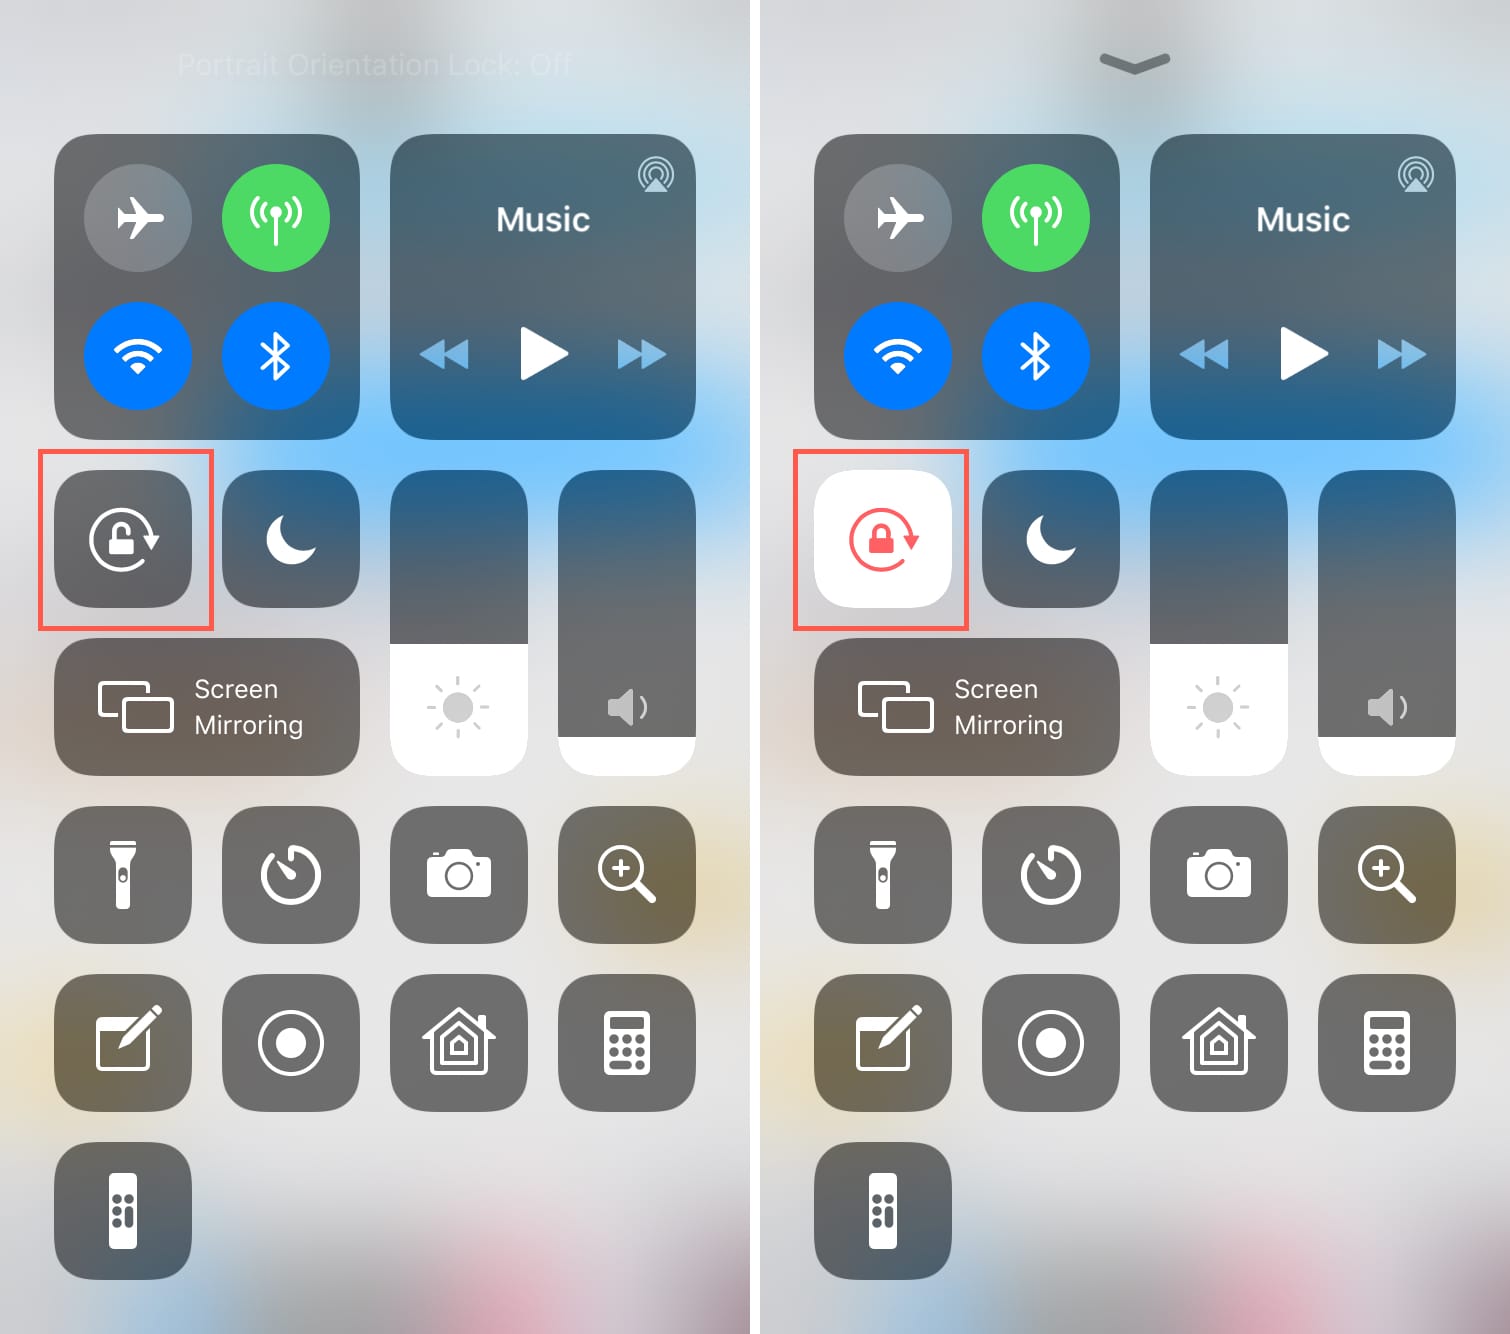 How to turn off iPhone screen rotation